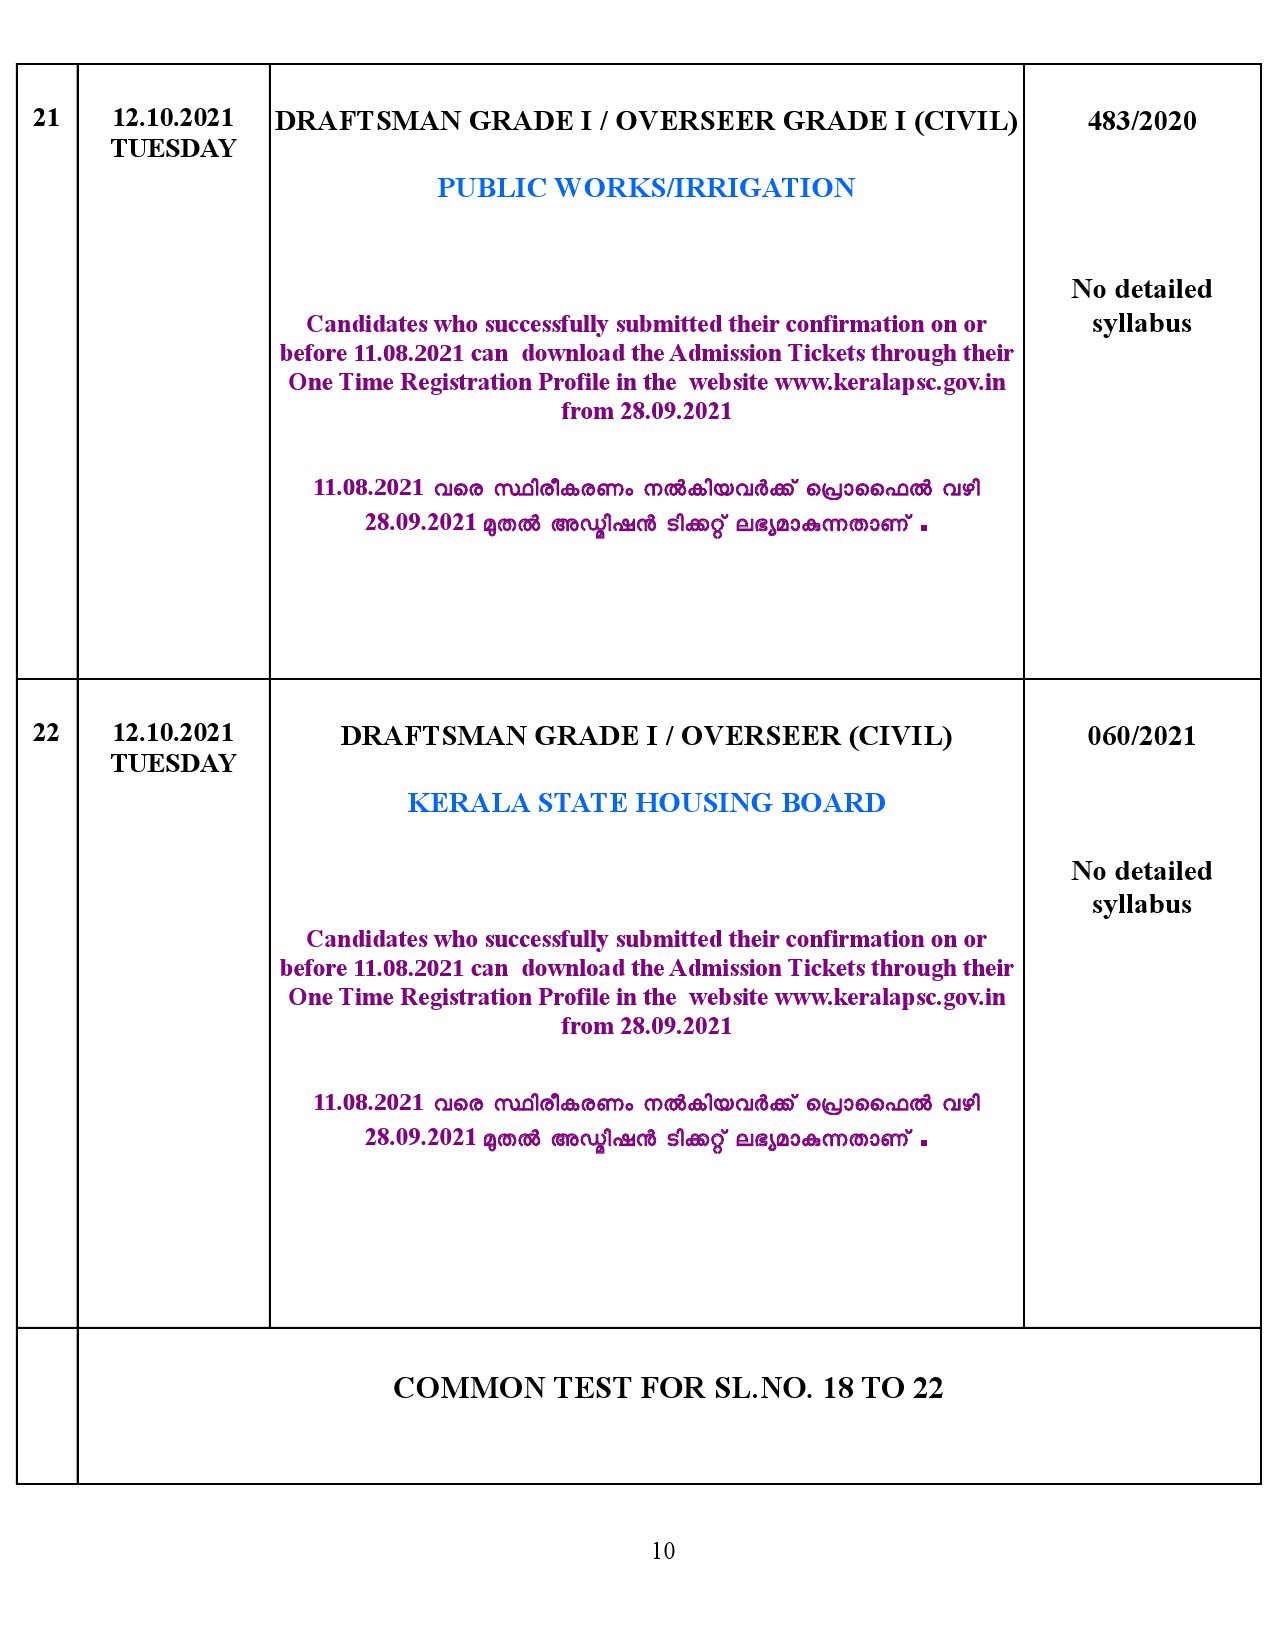 KPSC Modified Examination Programme For The Month Of October 2021 - Notification Image 10